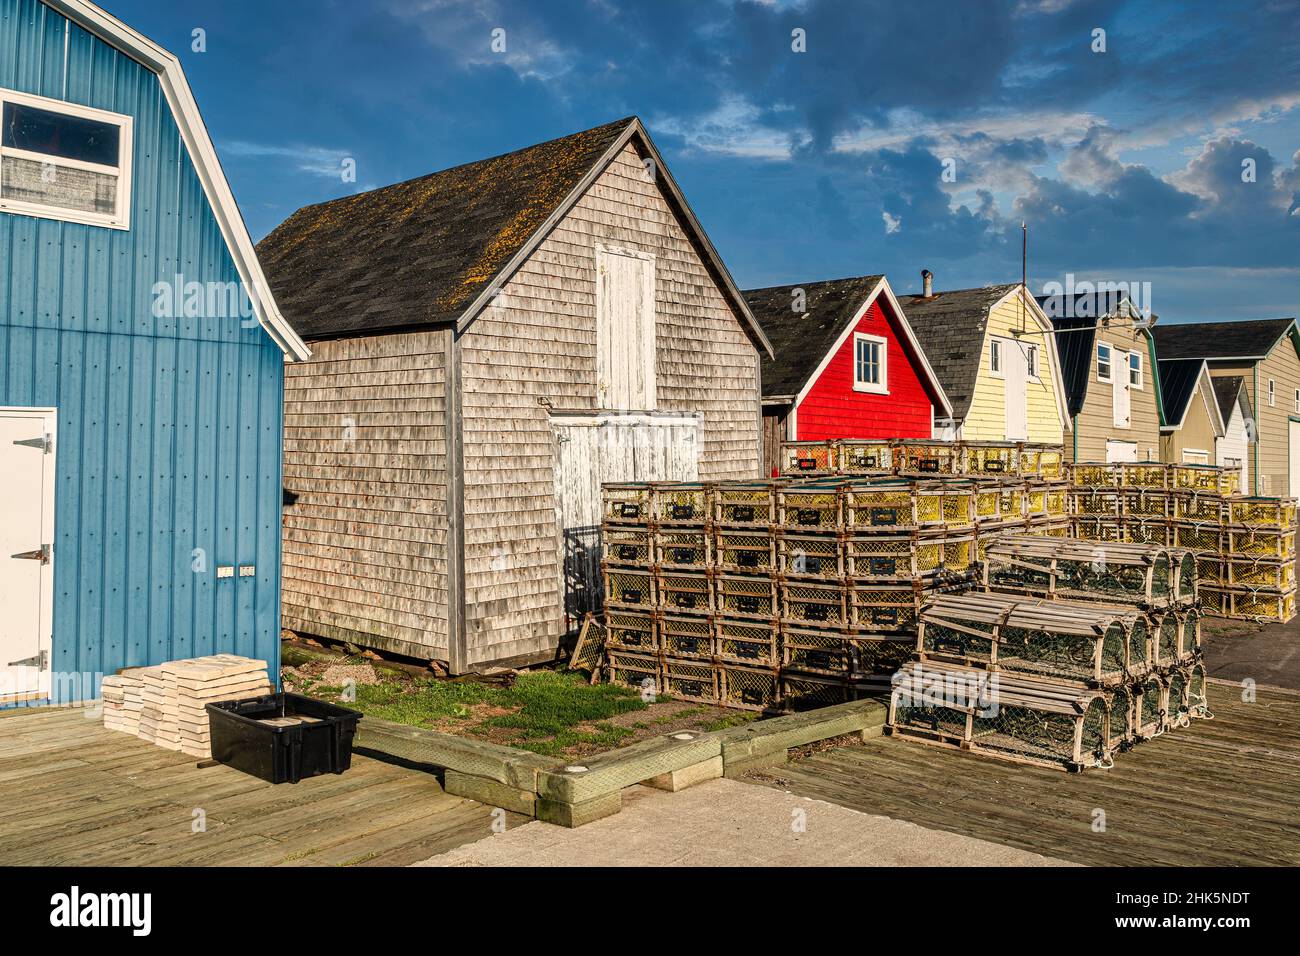 Lobster traps piled up on a wharf in front of colorful bait sheds. Stock Photo